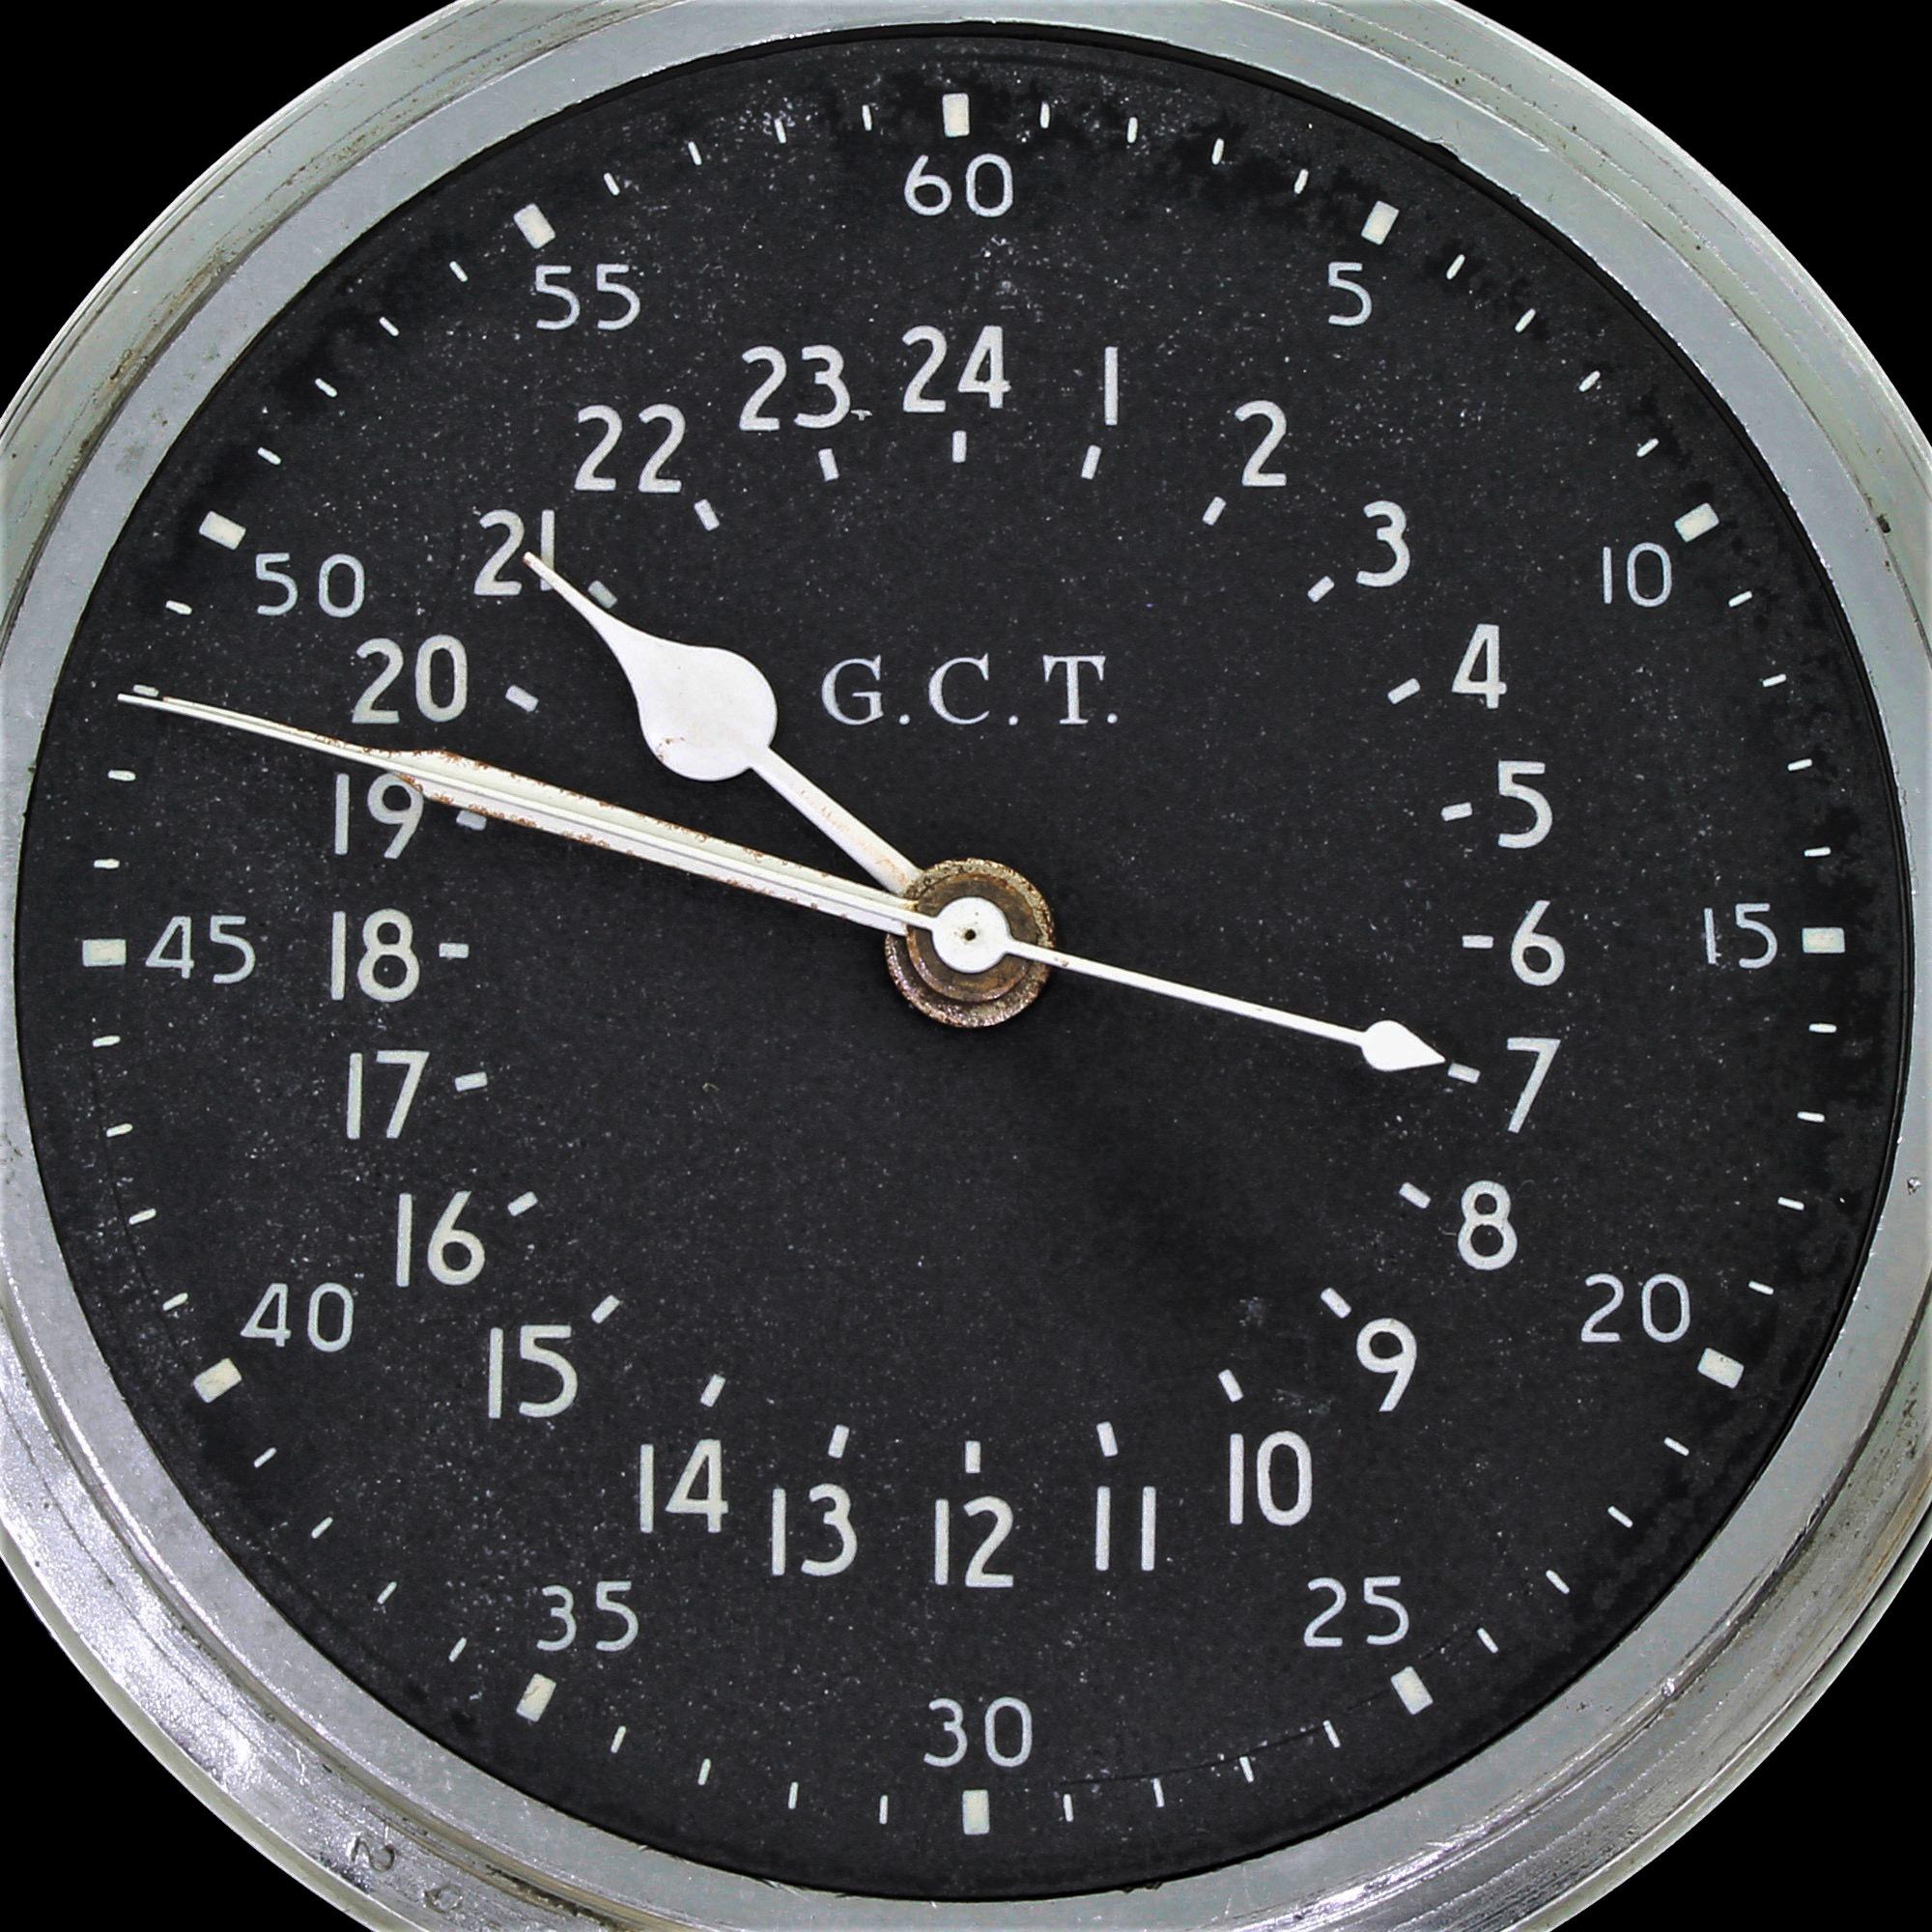 Exceptional Hamilton 4992B G.C.T. pocket watch assigned to military personnel during World War II. This pocket watch earned the name the 